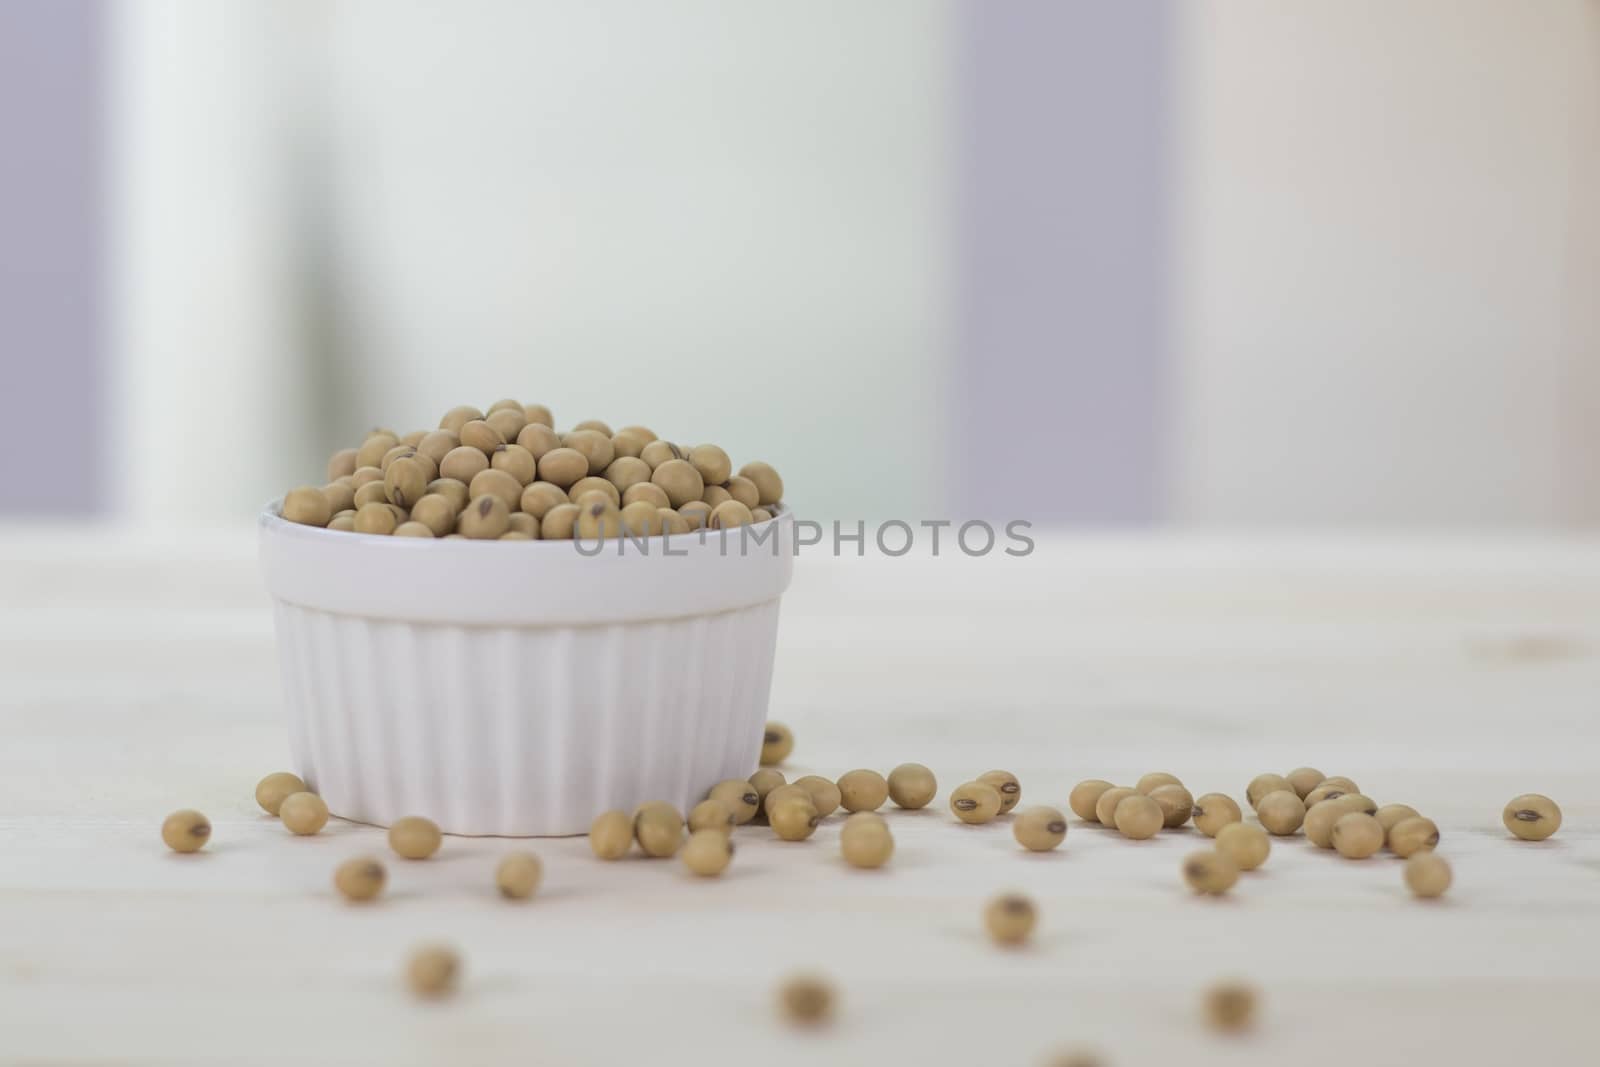 The soybeans are in the white cup placed on the wooden table. by Eungsuwat